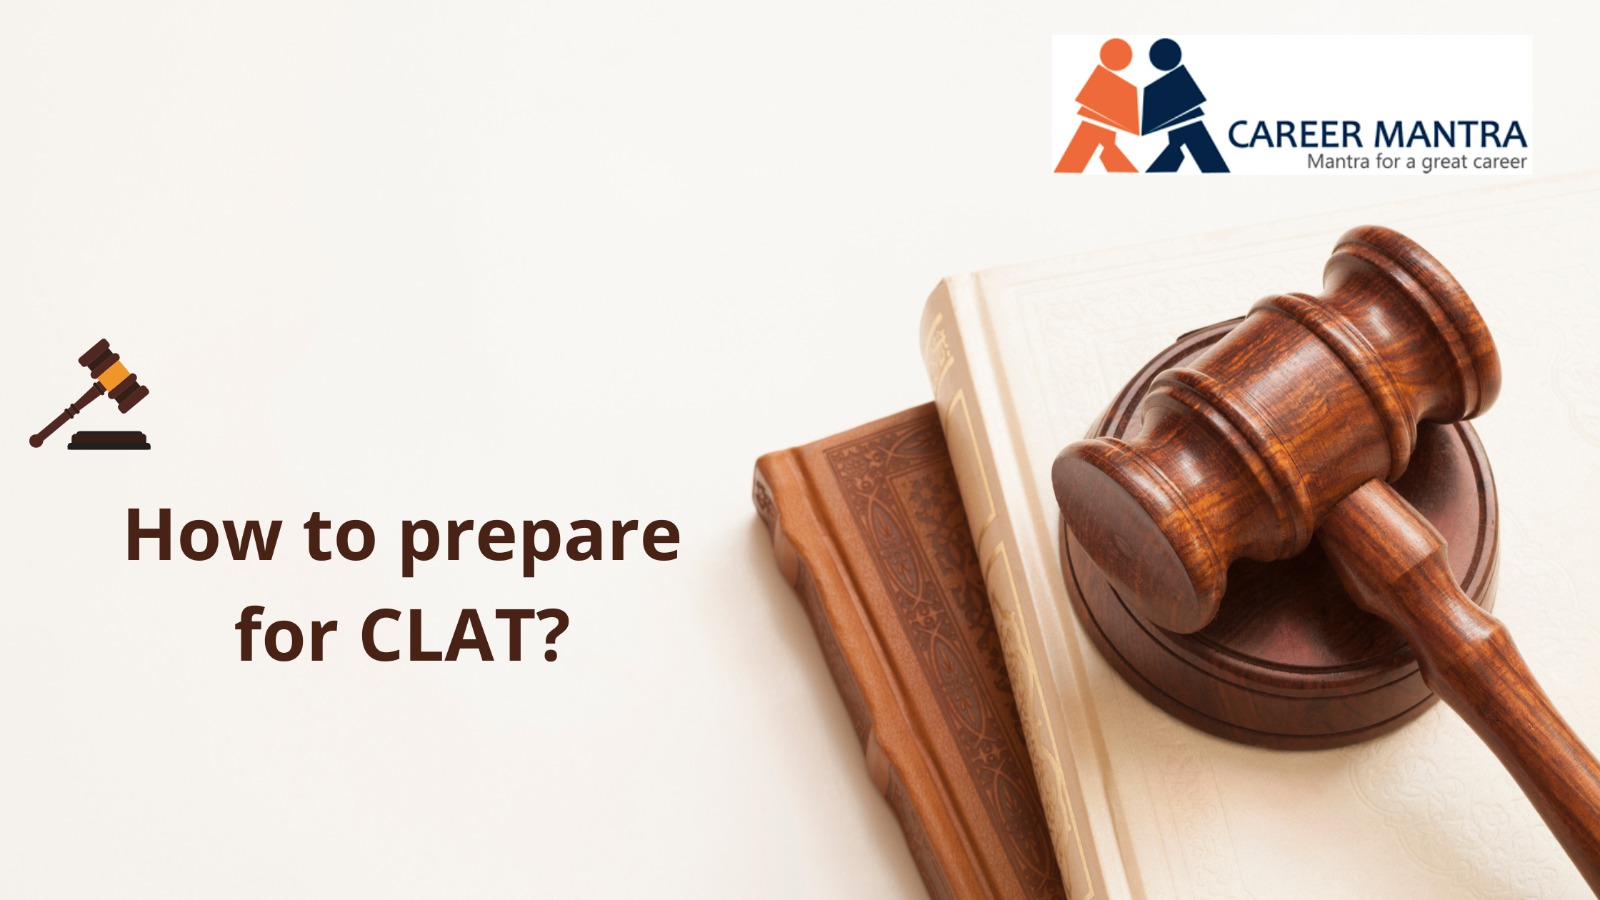 https://www.careermantra.net/blog/how-to-prepare-for-clat/